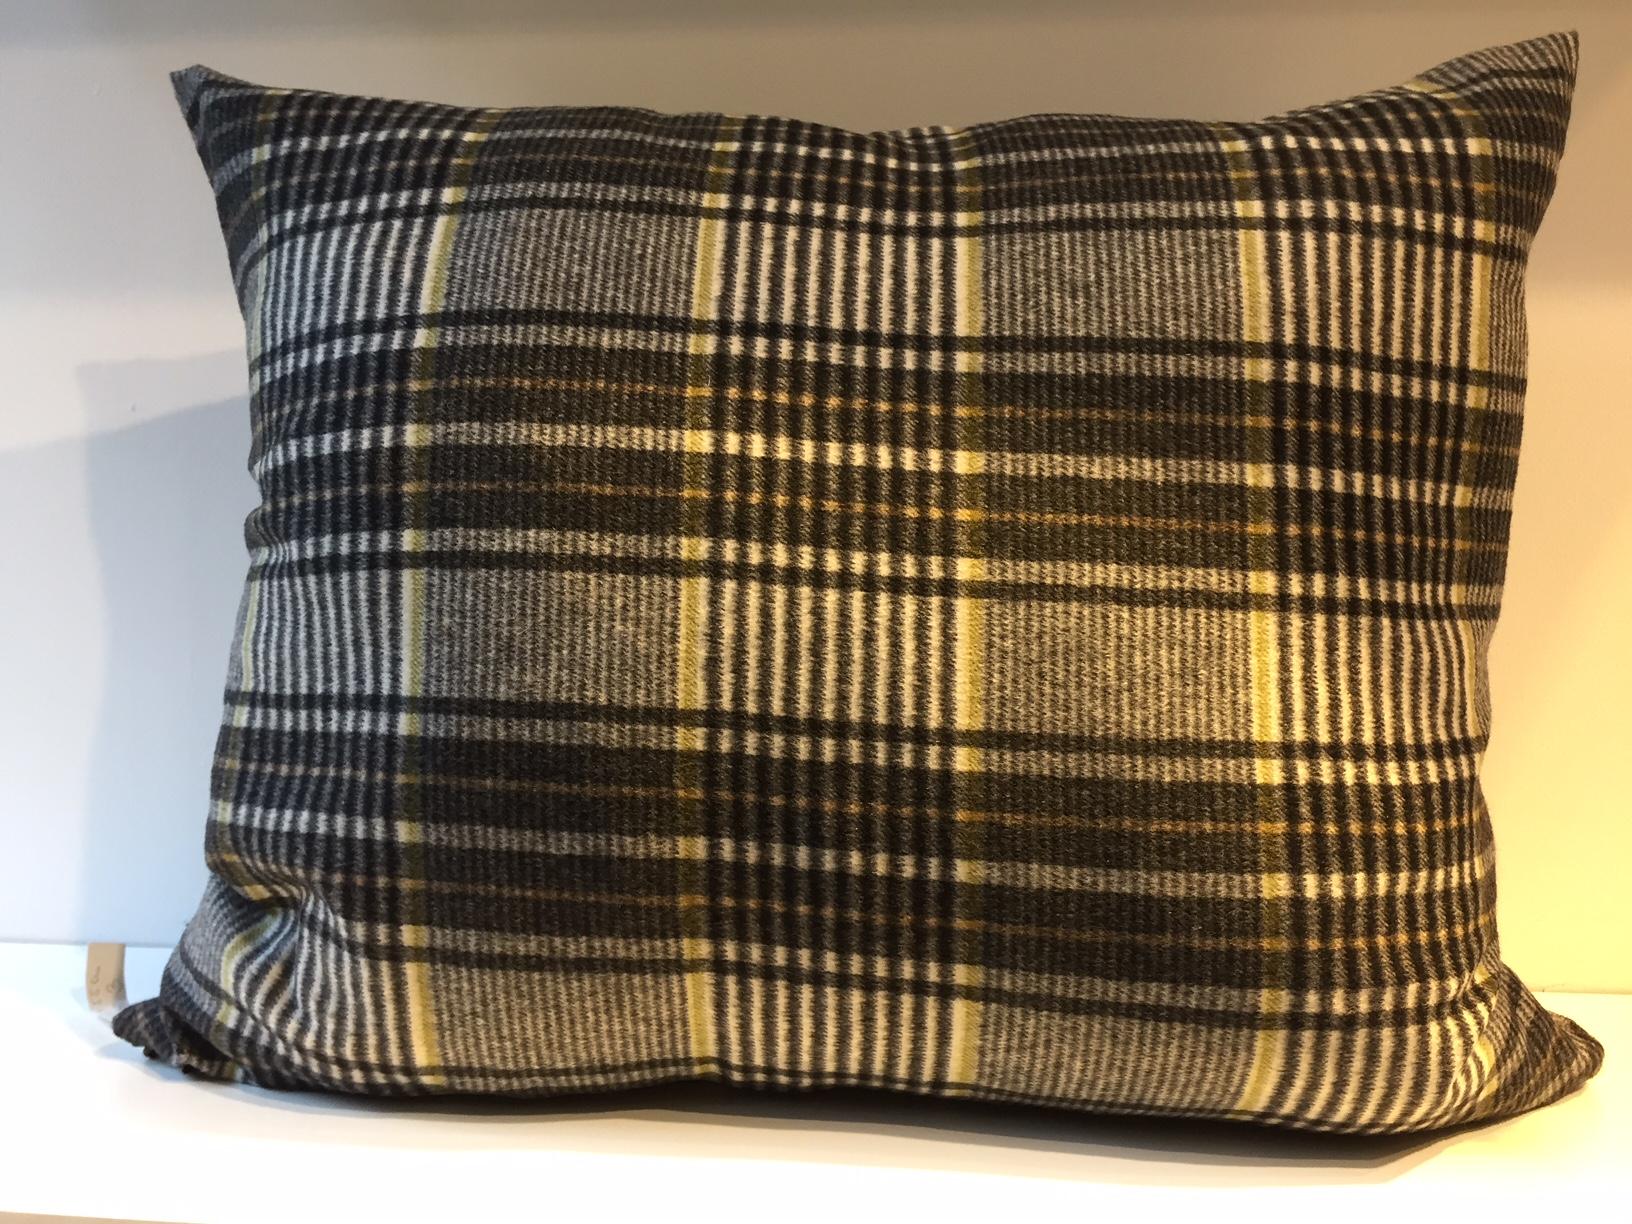 Modern Barbera Cashmere Cushion Black, Ivory, Cinnamon, Lime Woven Check Pattern For Sale